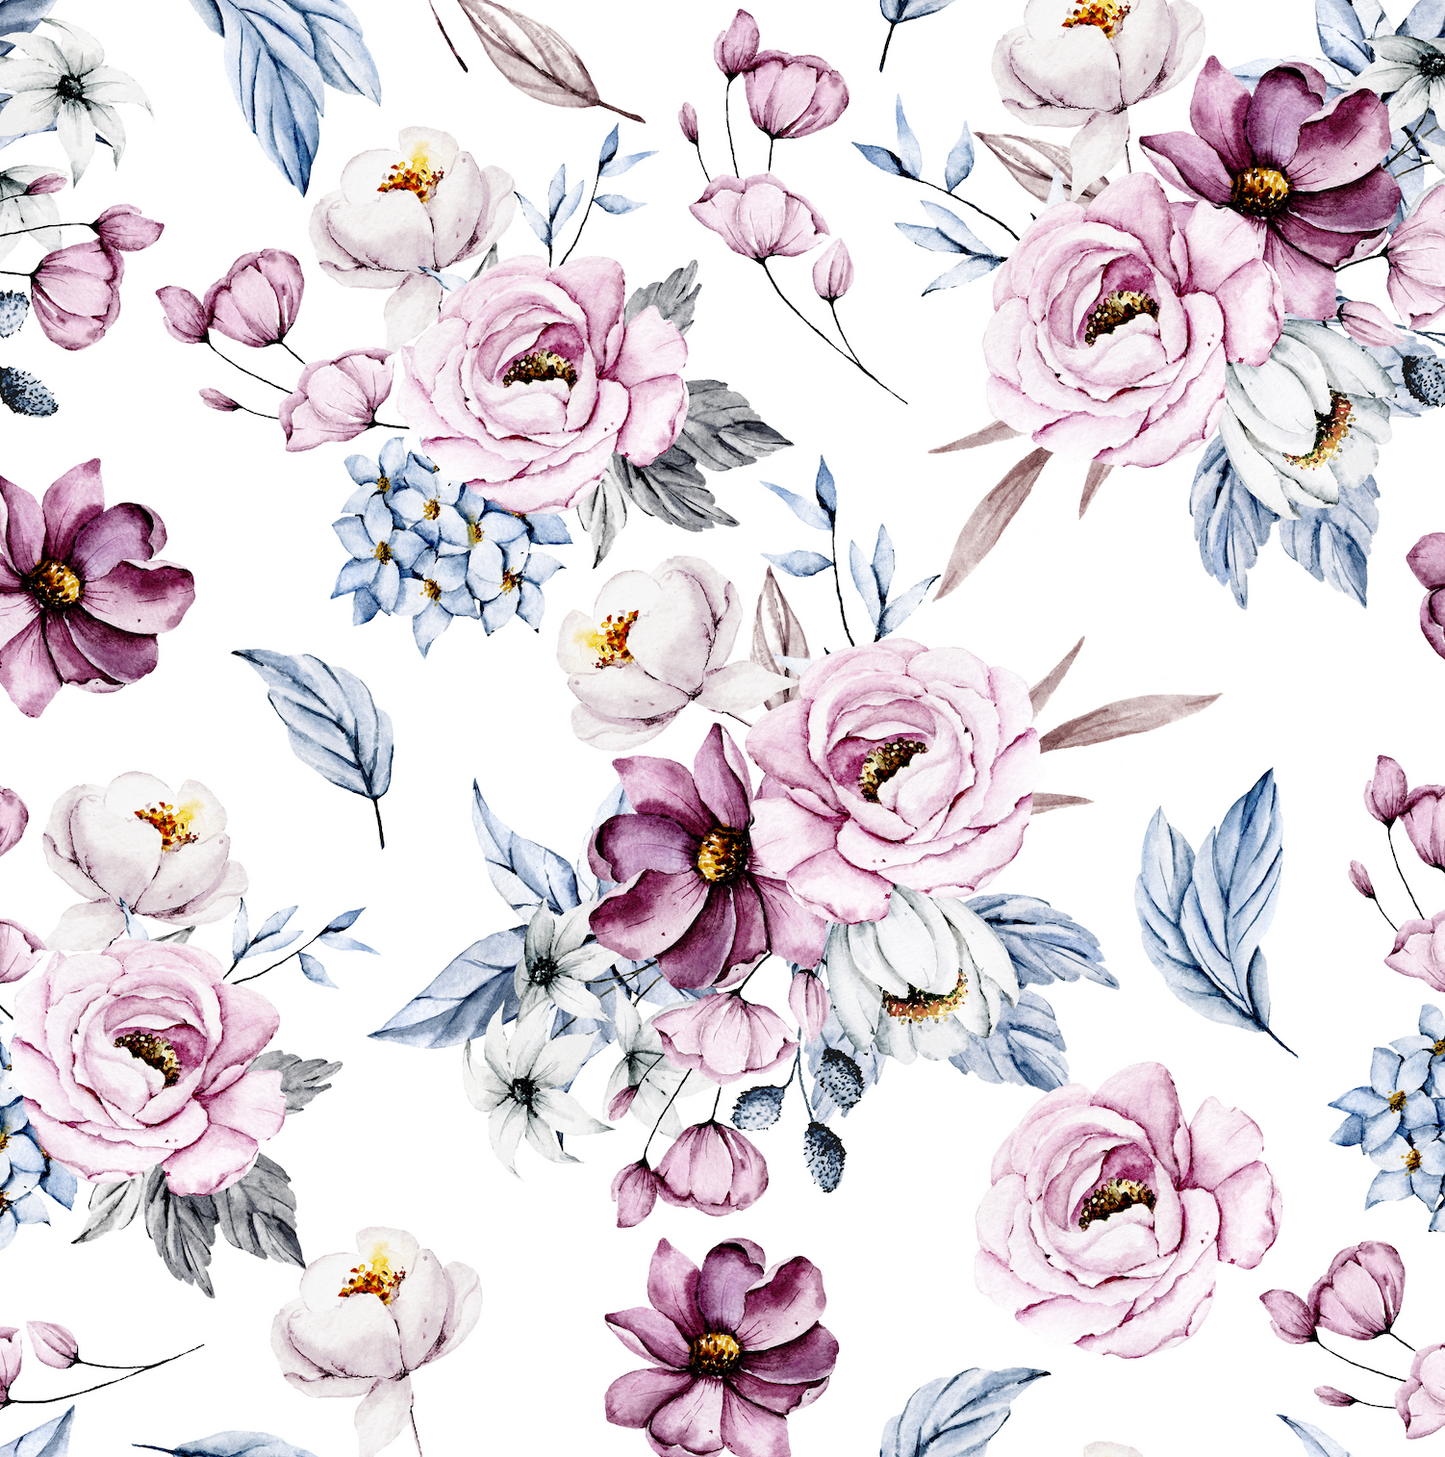 Bloom - 100% Cotton Woven Fabric